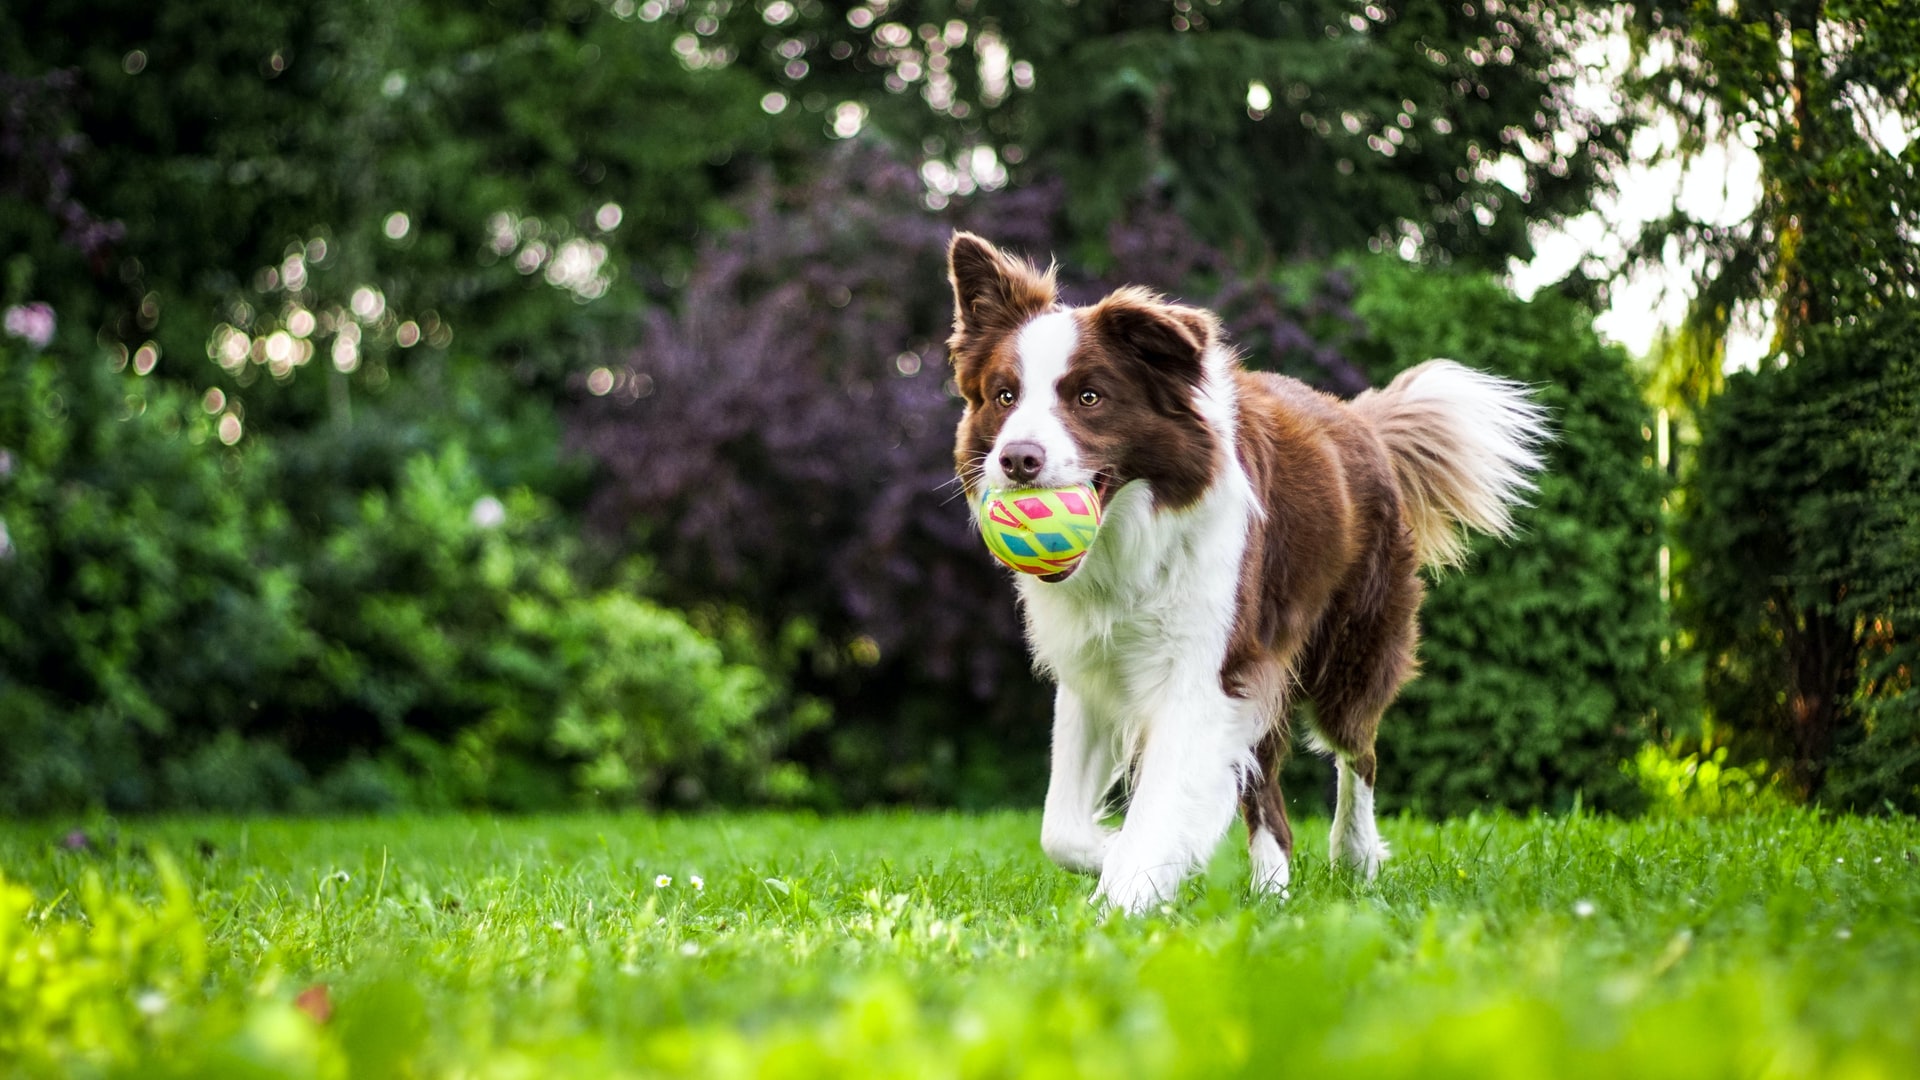 brown and white dog in green grassy field carrying toy ball in its mouth